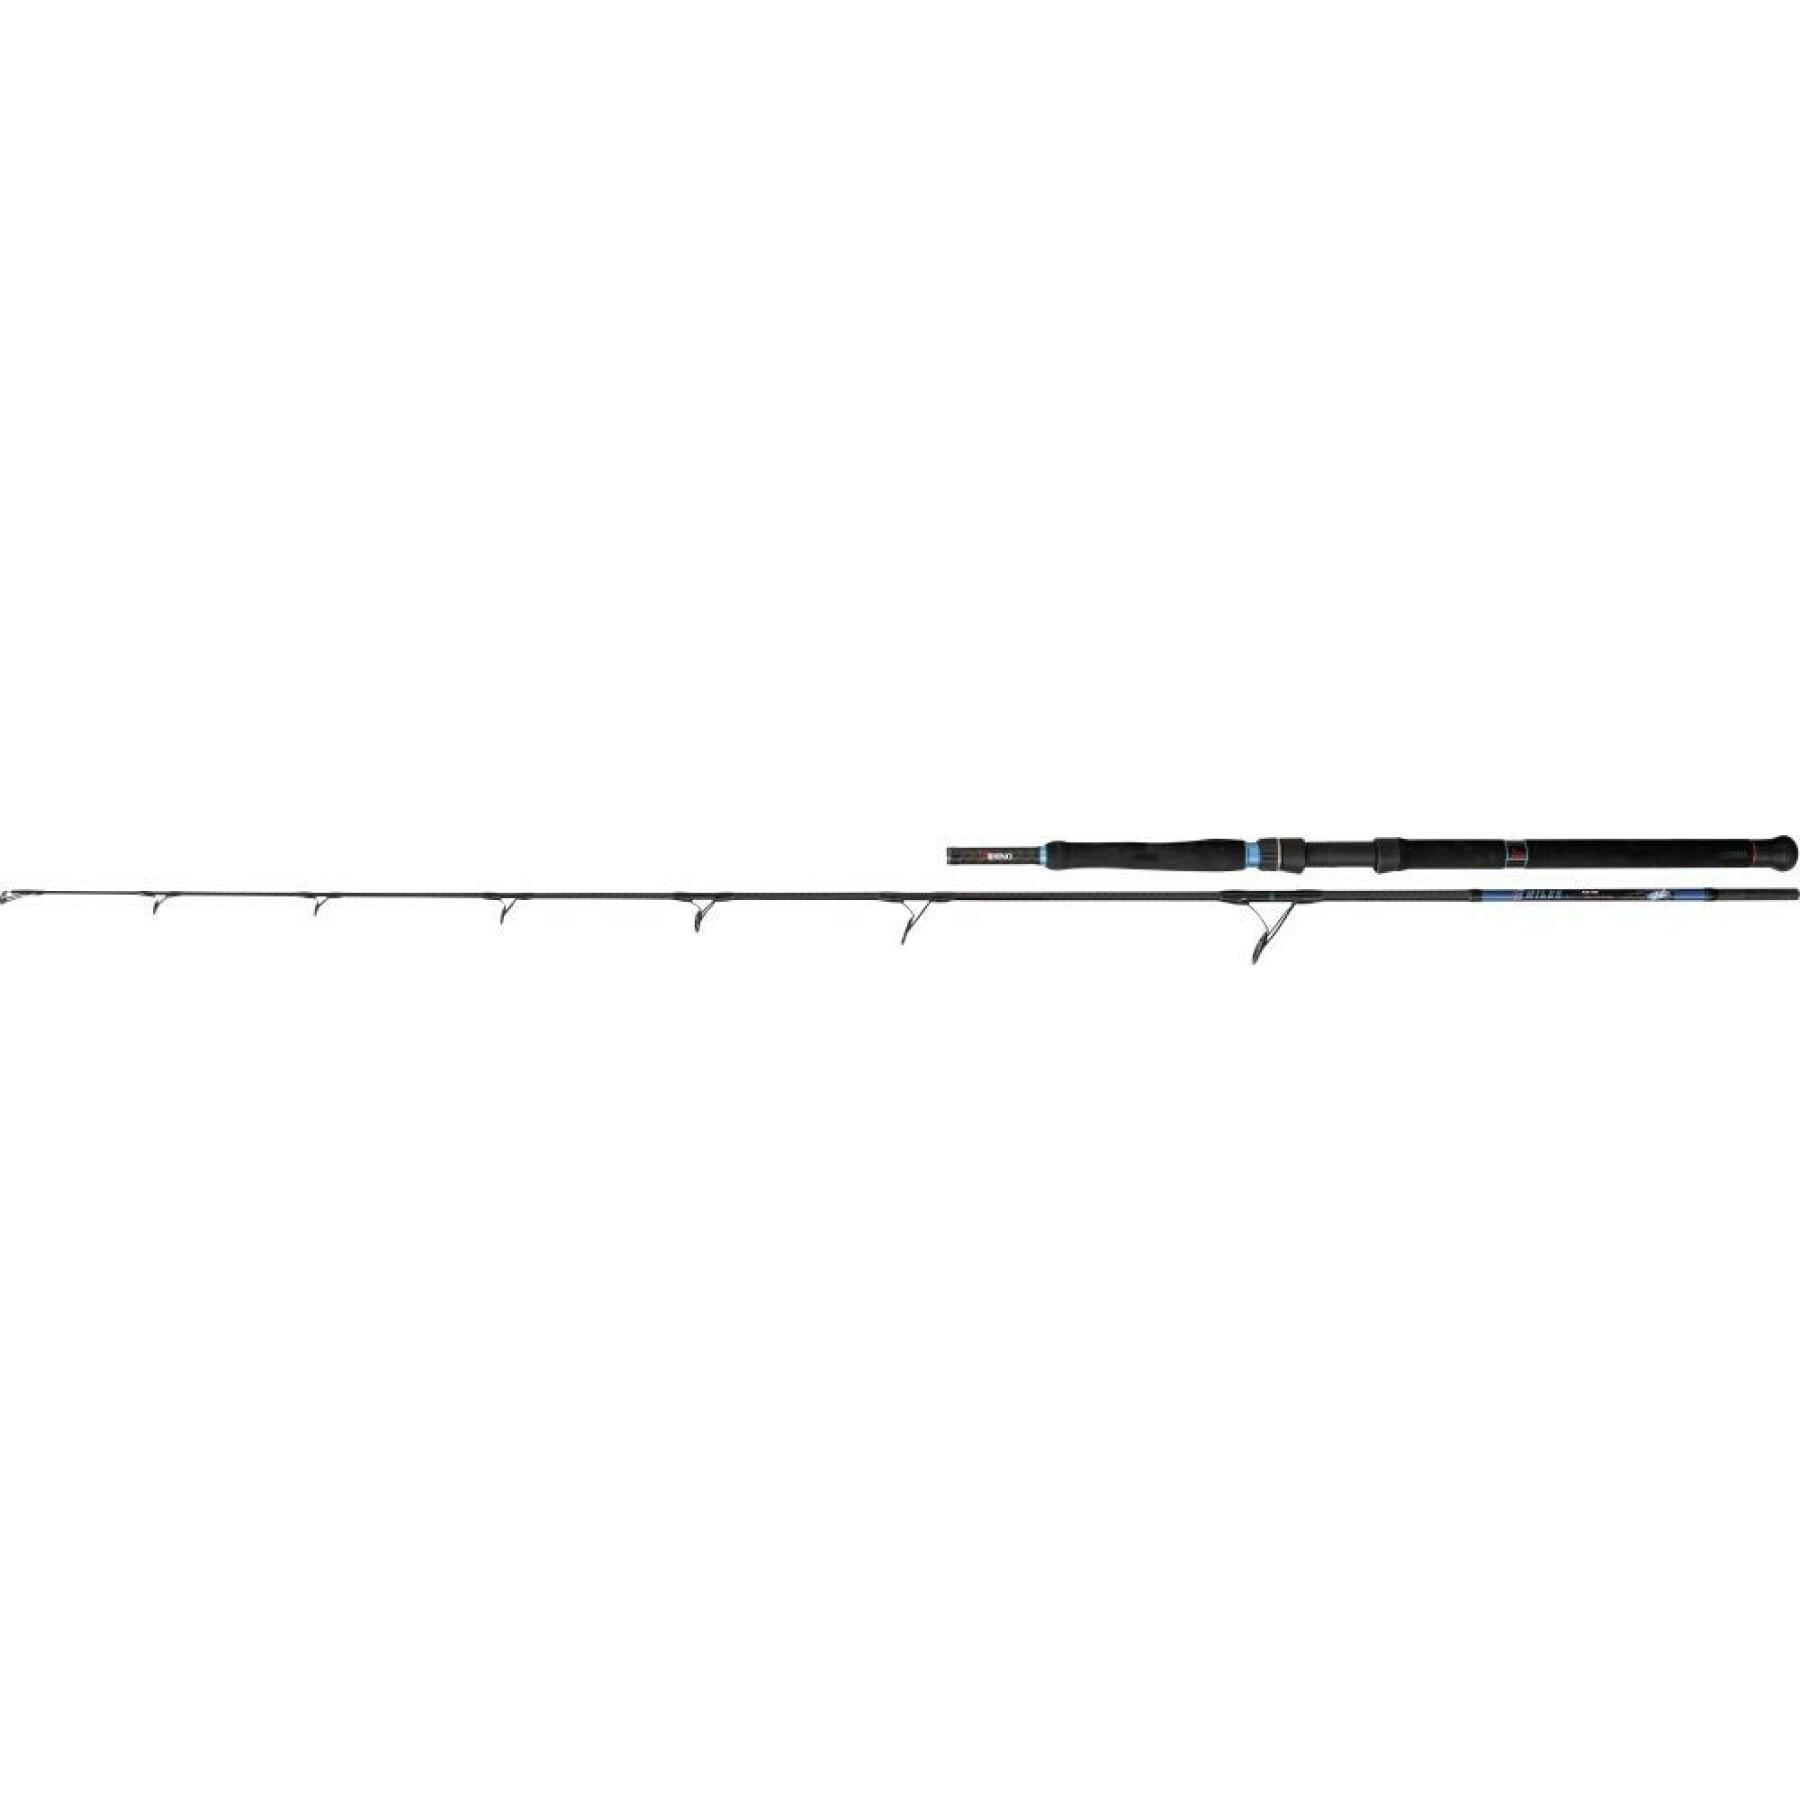 Cana Rhino 8 Miles Out Blue Fish 90-180g